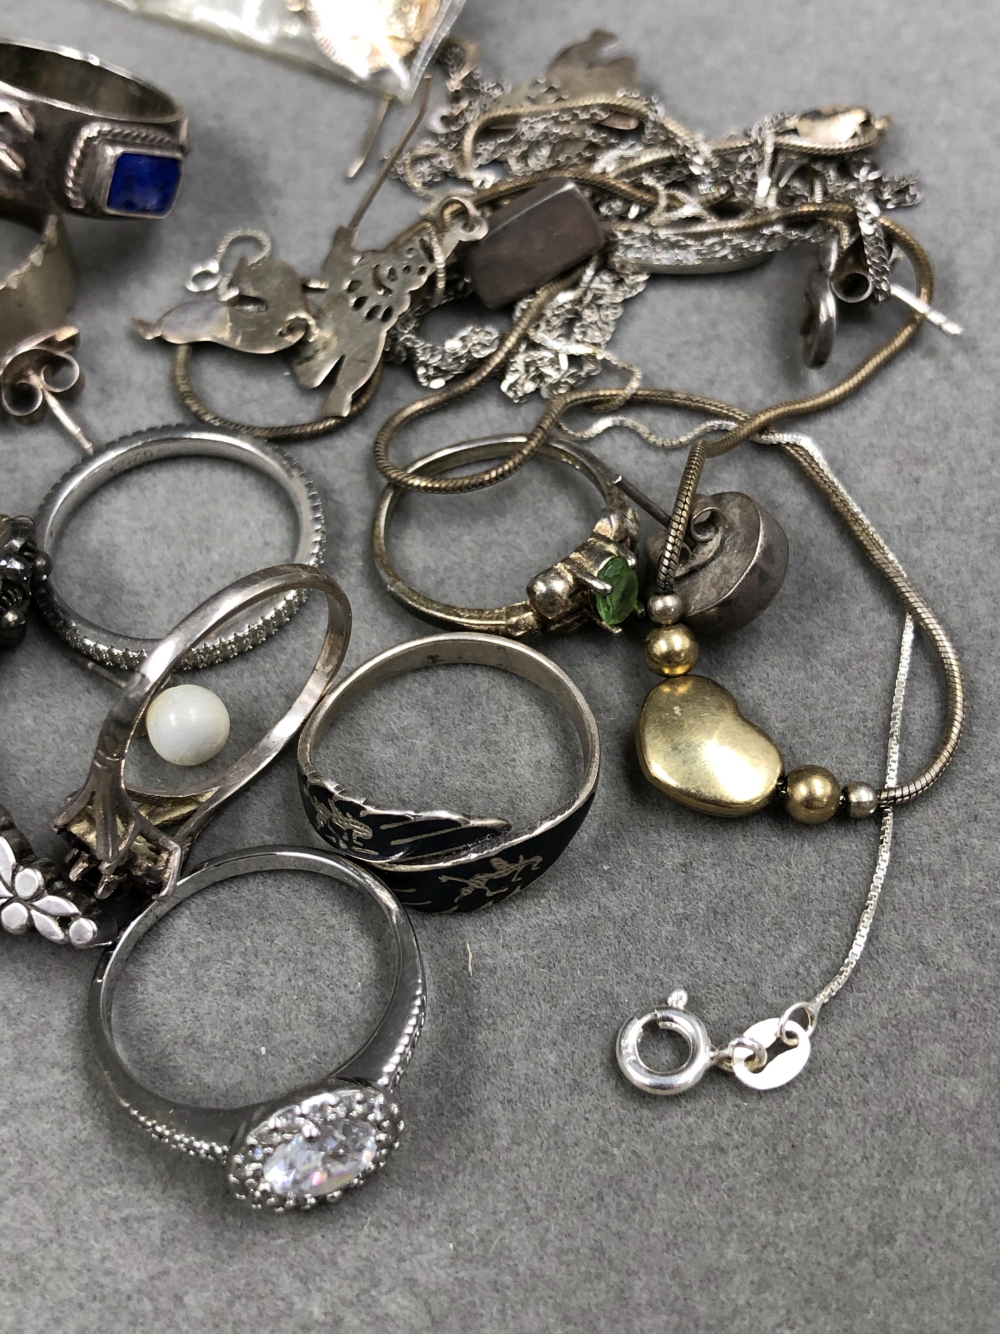 A QUANTITY OF JEWELLERY TO INCLUDE SILVER, COSTUME, BEADS, PEARLS, WATCH KEYS, ETC. - Image 6 of 15